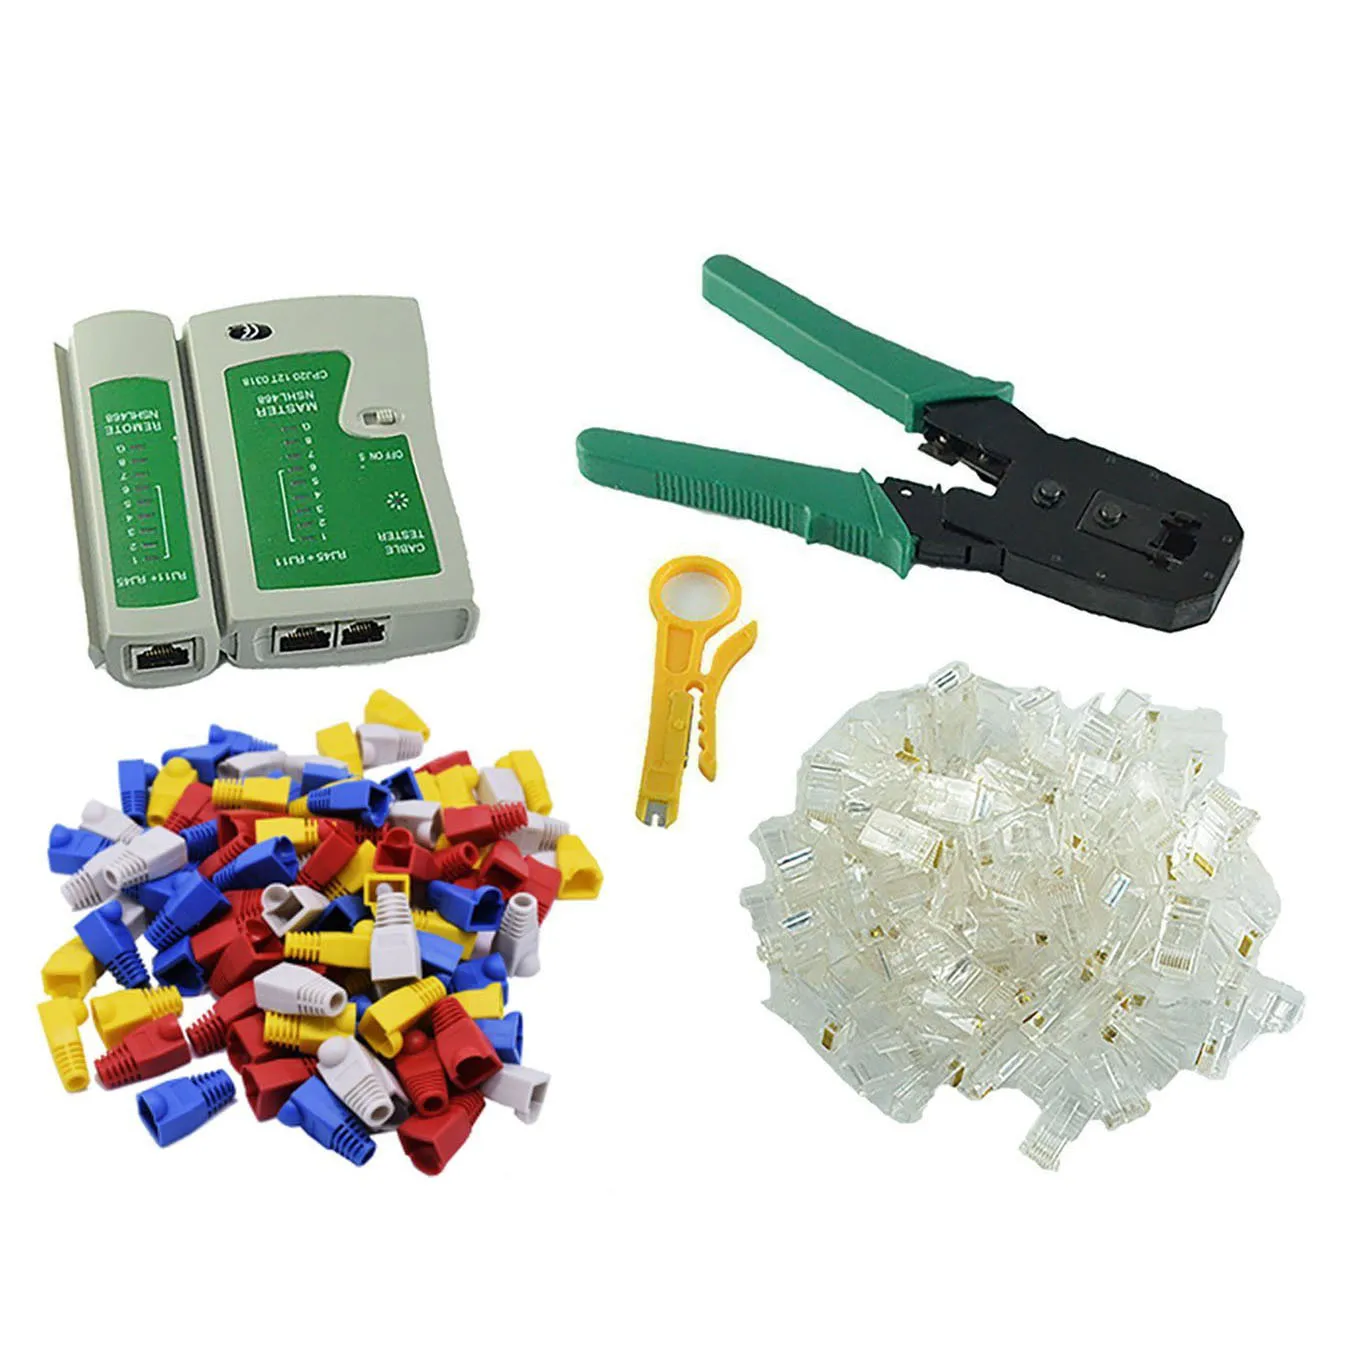 

Multifunction RJ11 RJ45 Cat5 Cat6 Crimping Plier Network Crimper Tools Kit With 100 8P8C Connector Cable Tester 100 Plug Cover